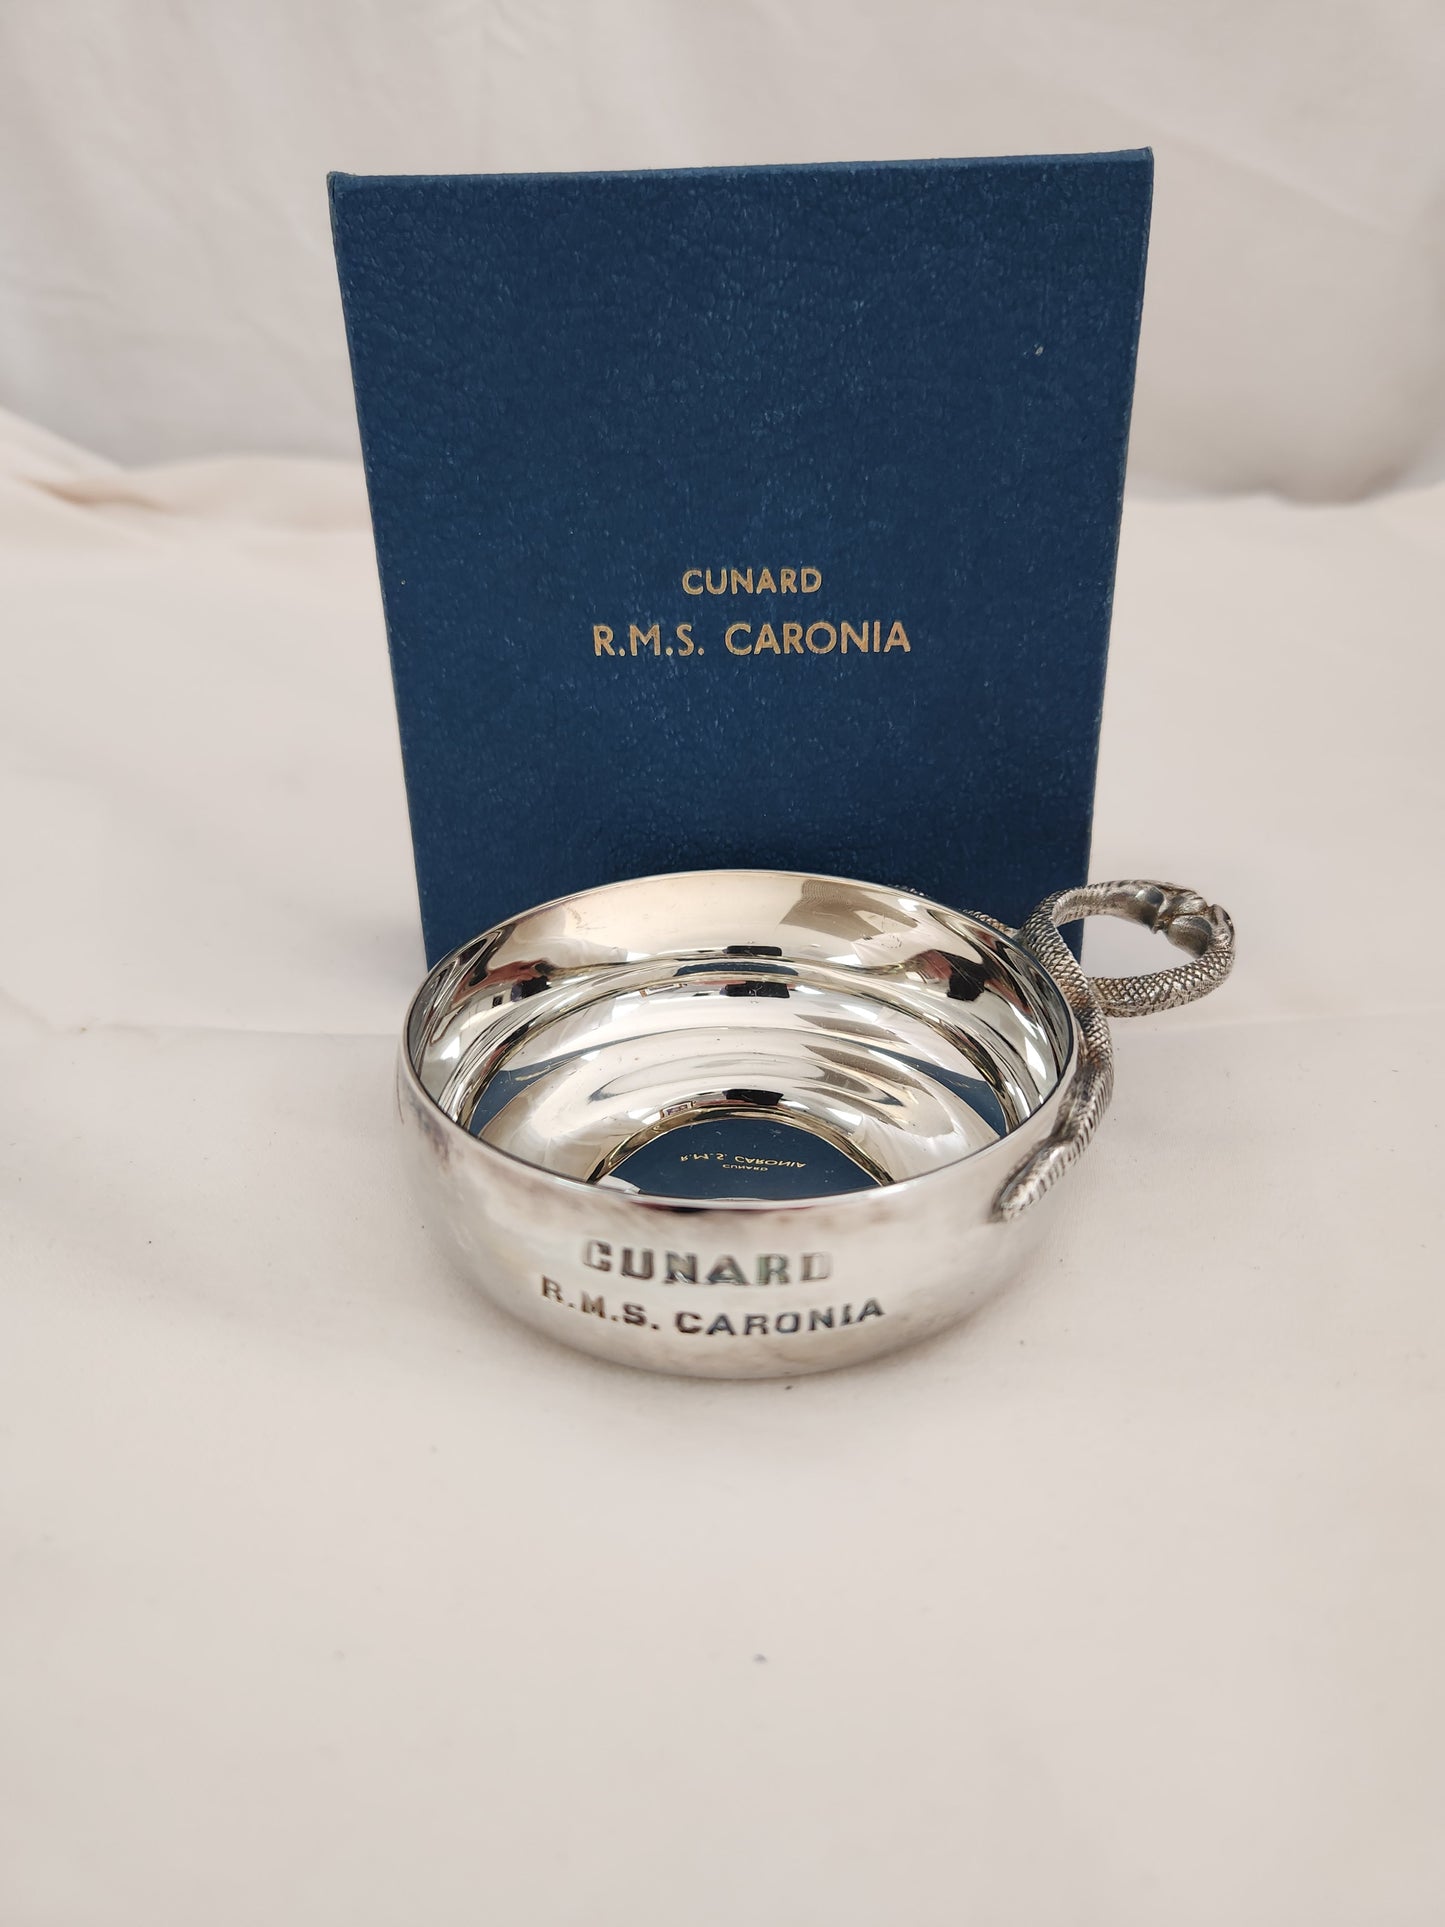 Rare - Cunard R.M.S. Caronia Silver Wine taster Cup with Box